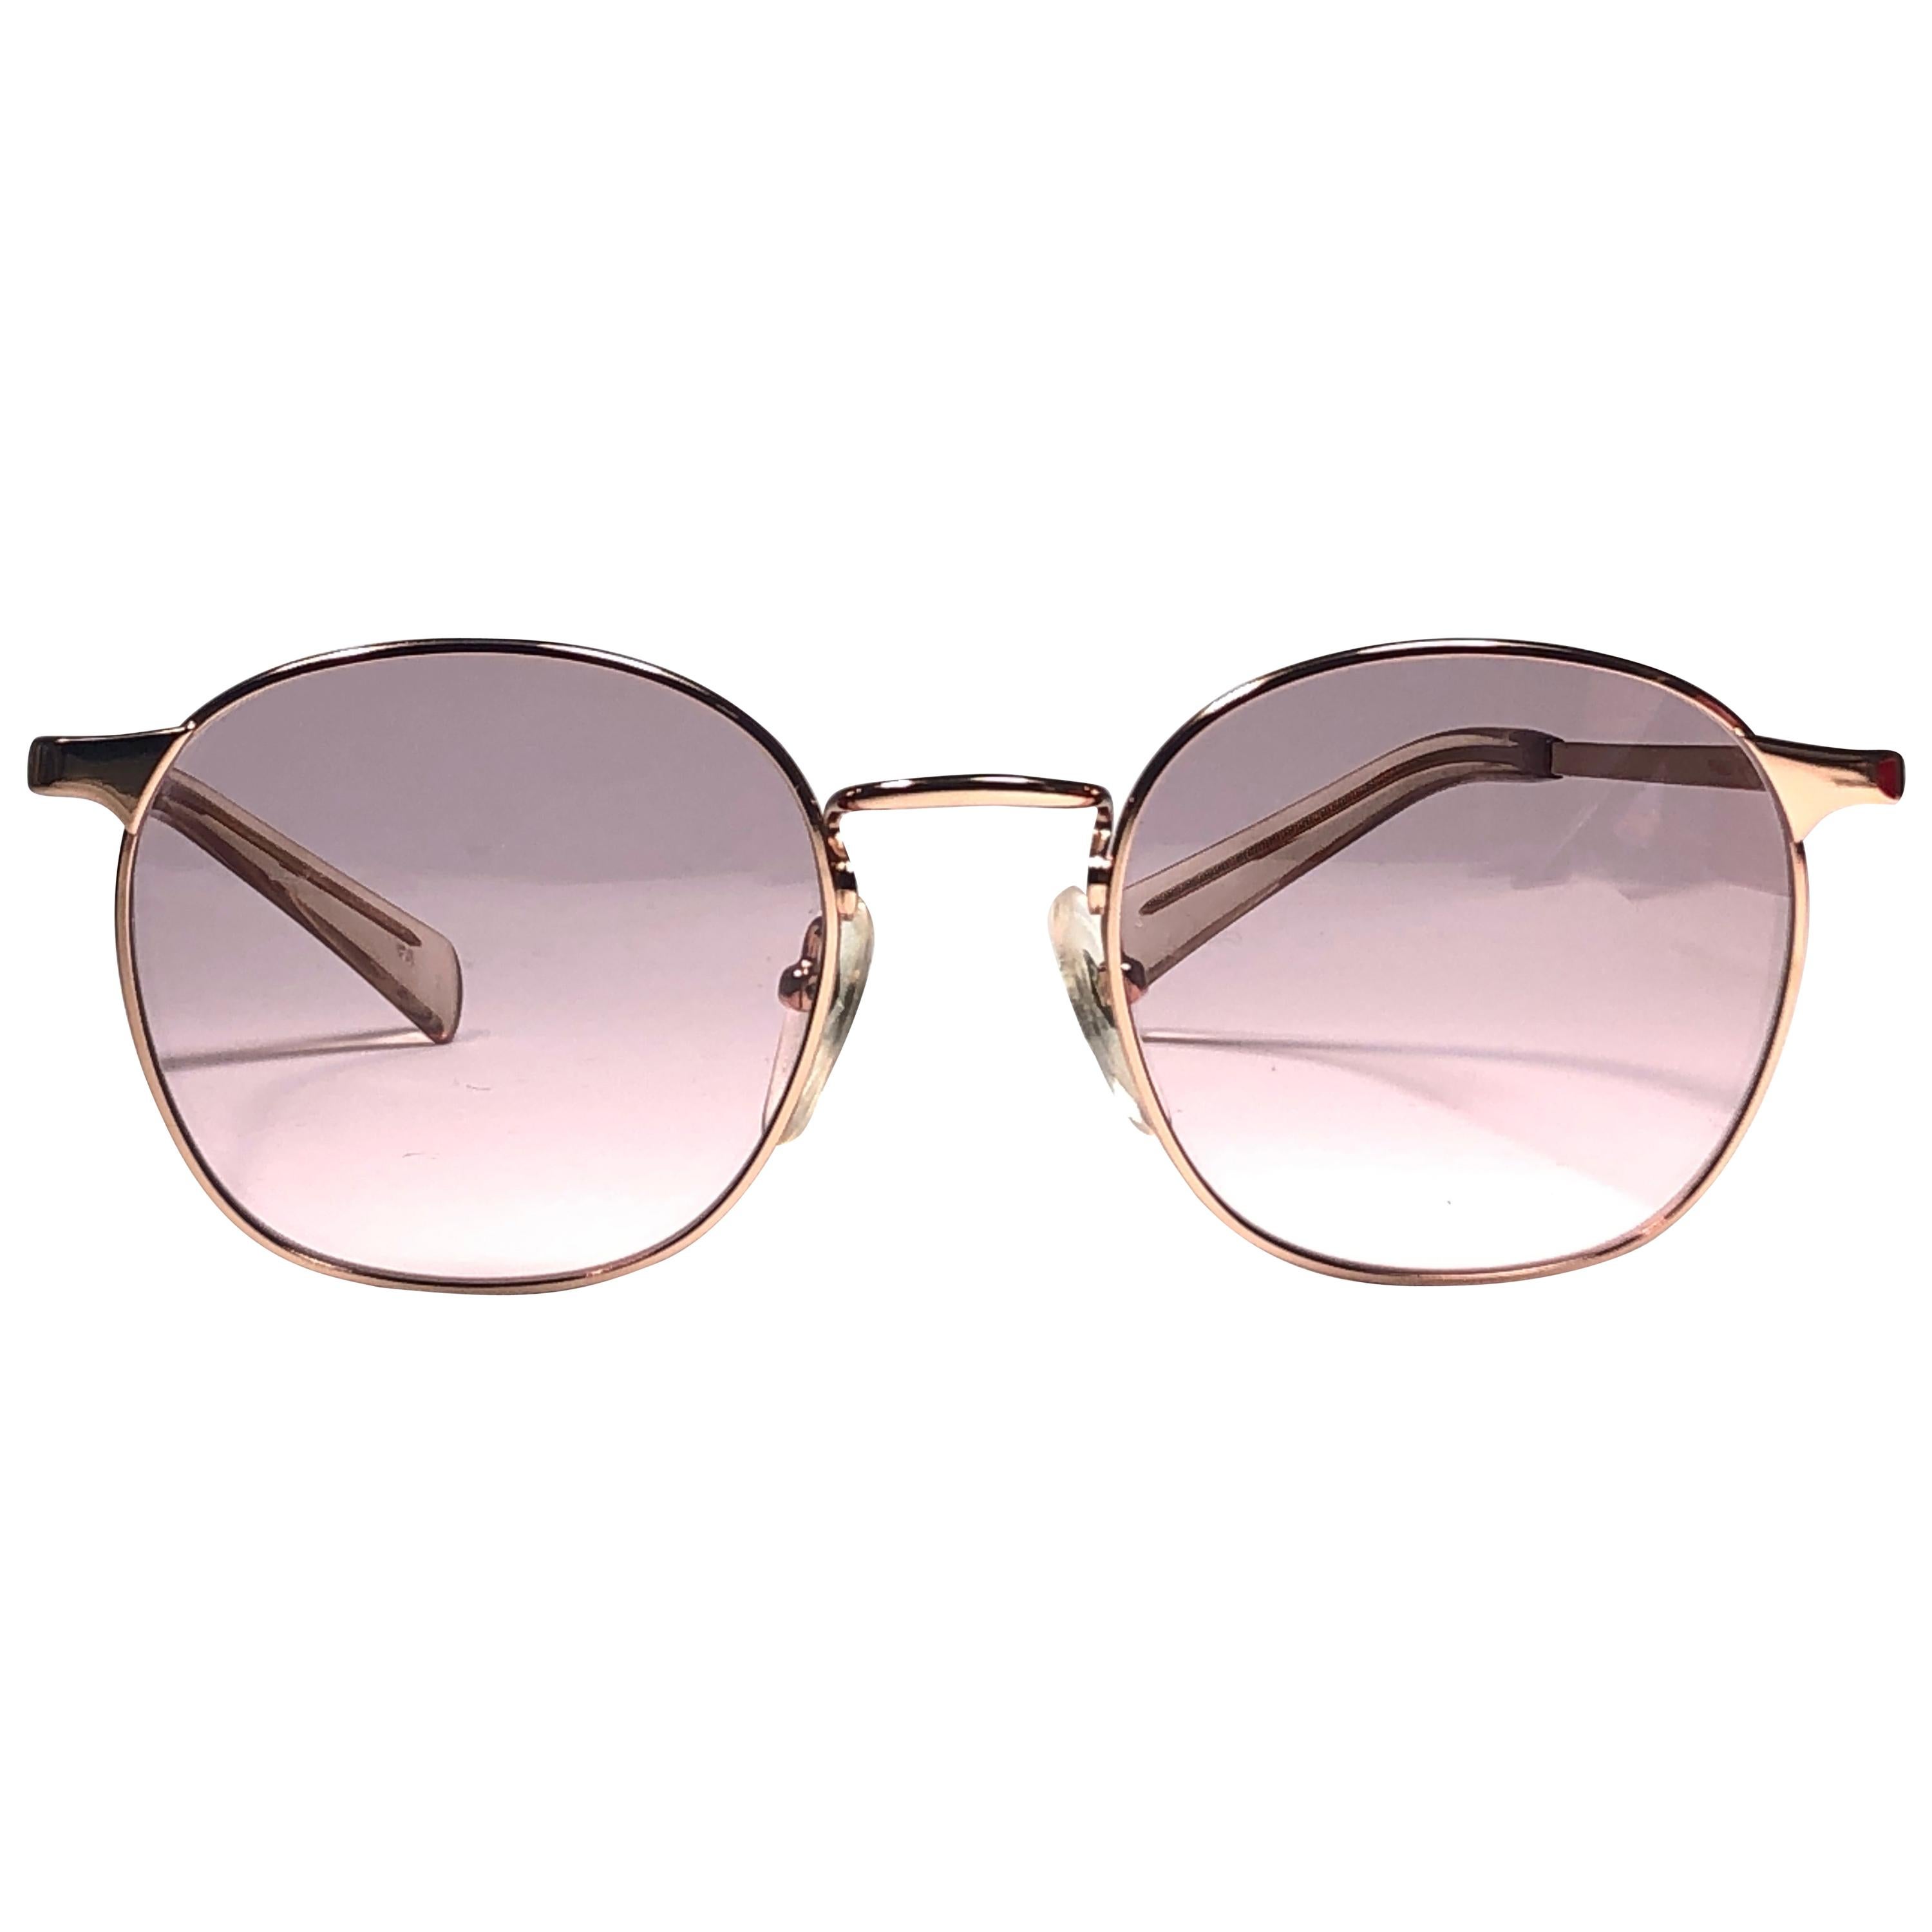 New Jean Paul Gaultier Junior 57 0172 Rose Gold Sunglasses 1990 Made in Japan  For Sale